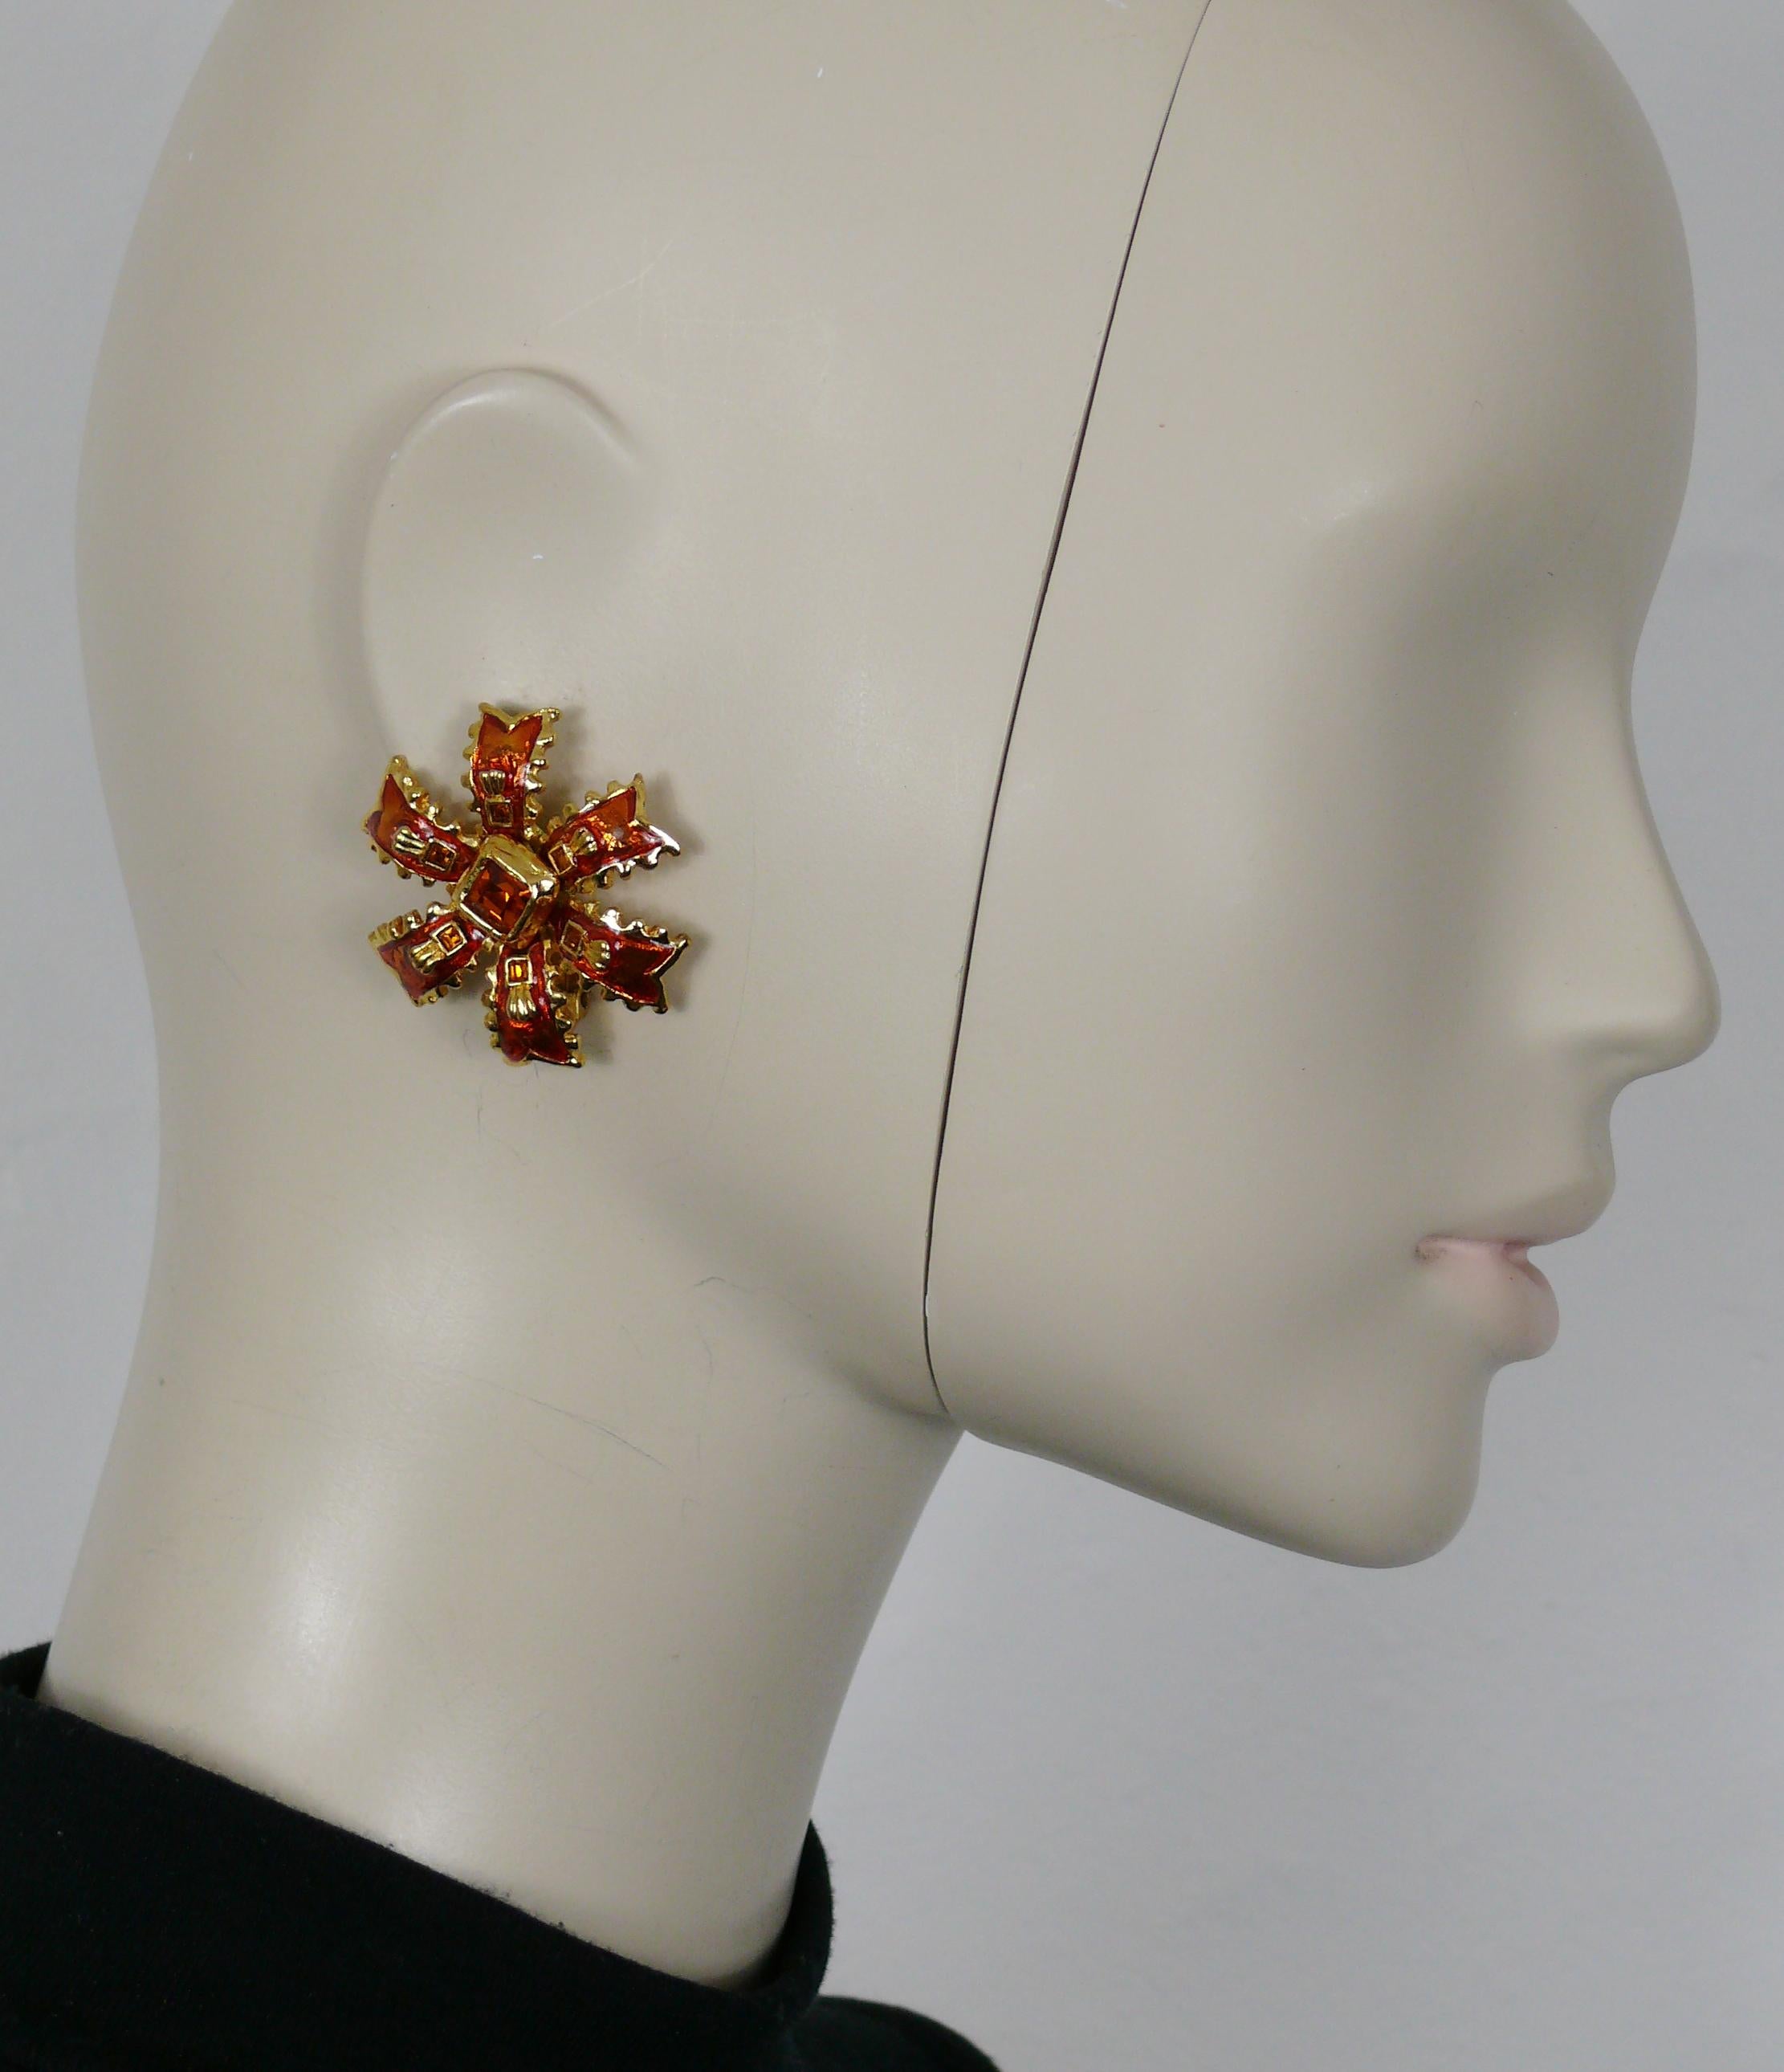 YVES SAINT LAURENT vintage gold tone clip-on earrings embellished with orange enamel and orange crystals.

Embossed YSL Made in France.

Indicative measurements : max. height approx. 4 cm (1.57 inches) / max. width approx. 3.7 cm (1.46